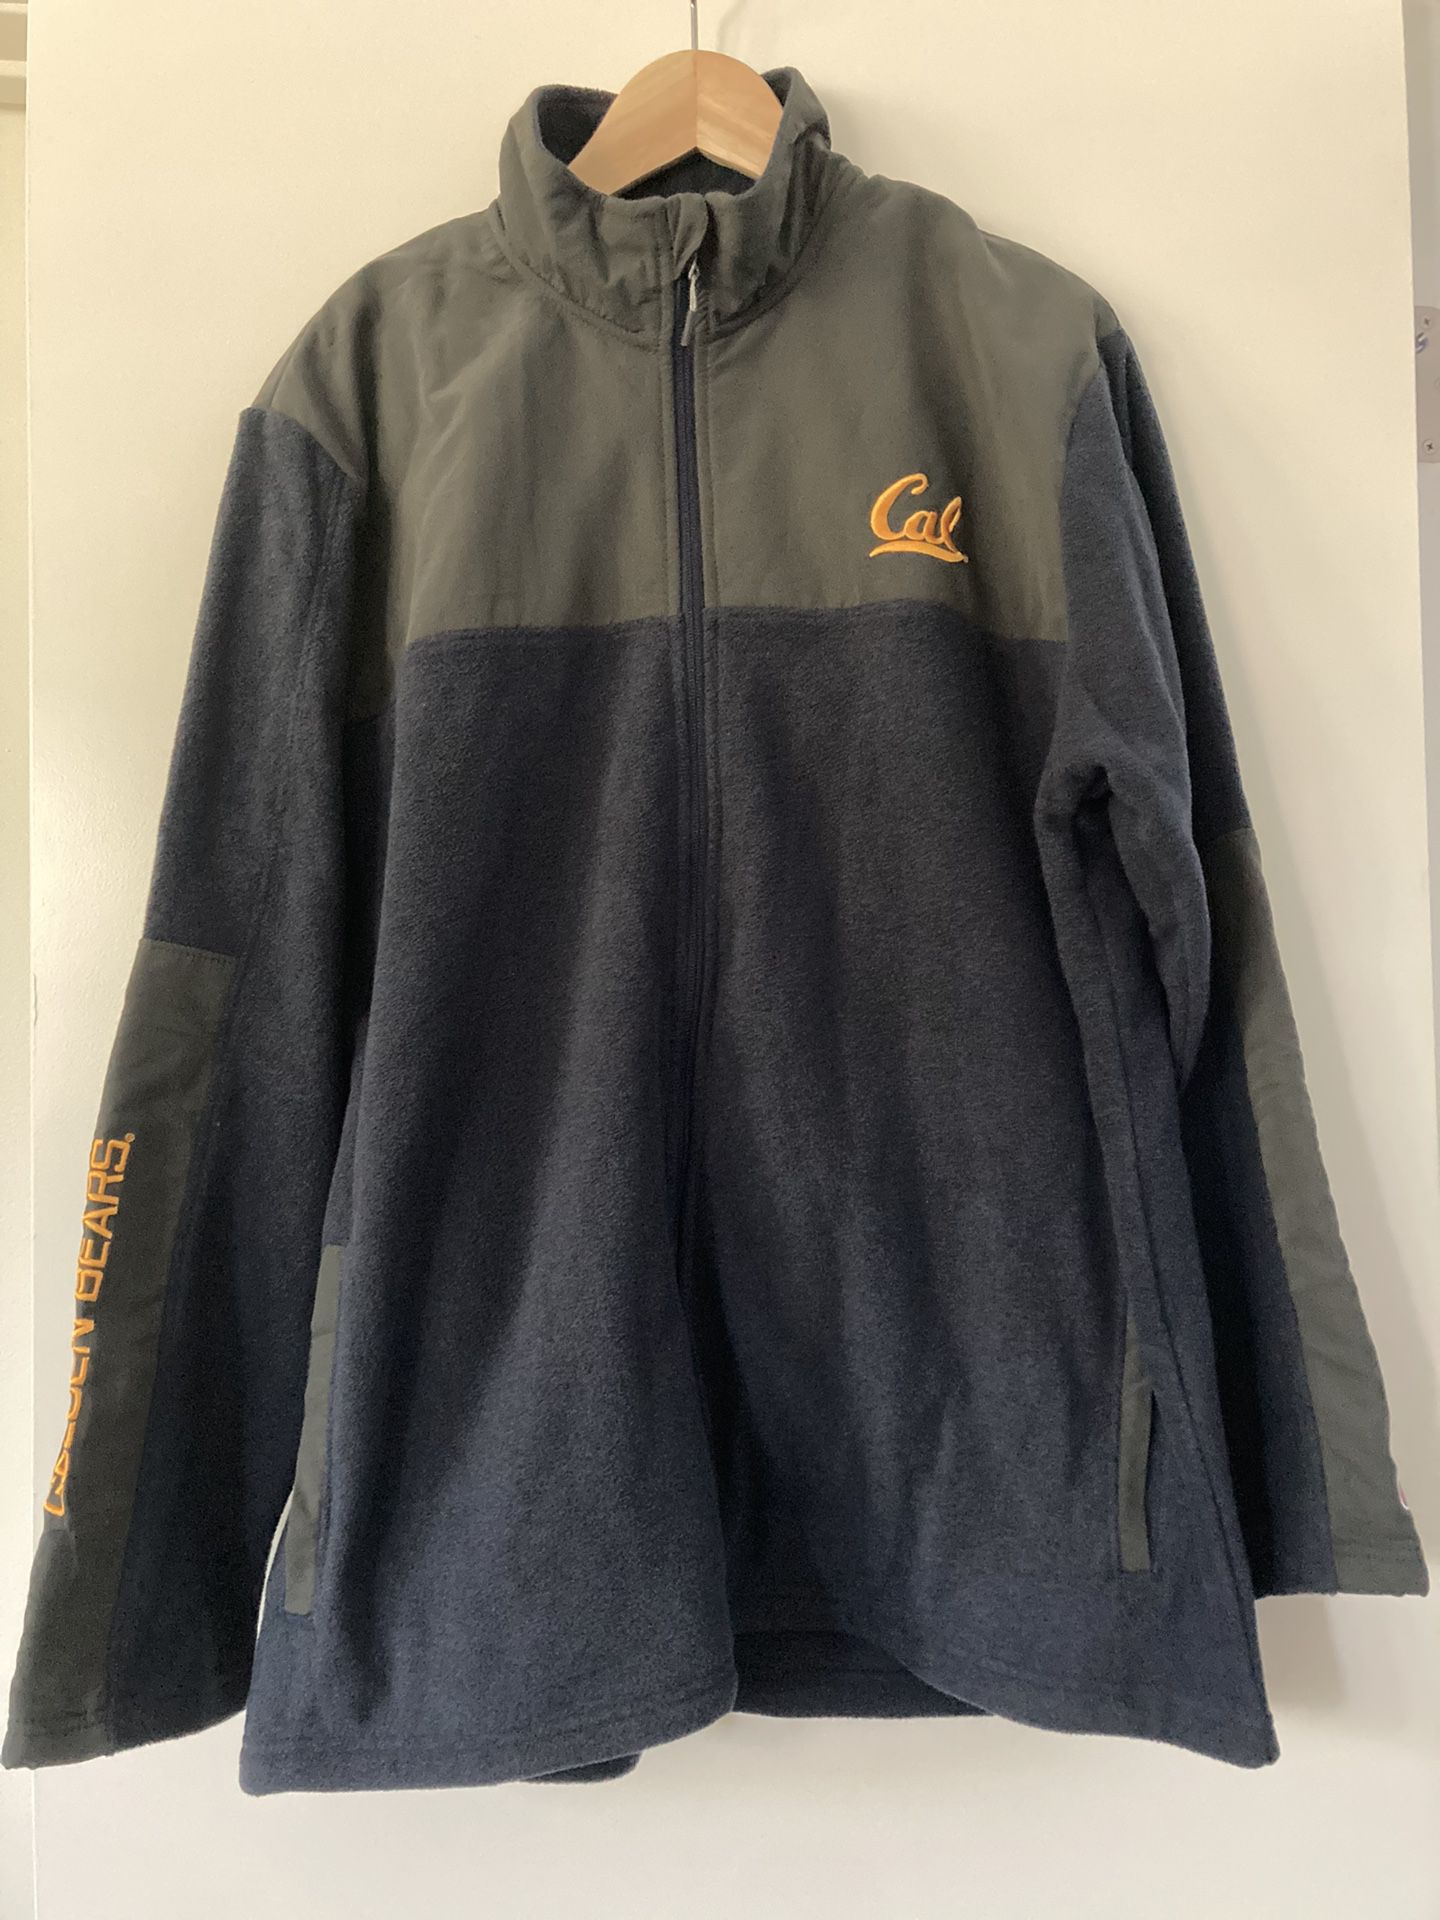 New with Tag Men’s Champion Cal Golden Bears Fleece Jacket - Blue Gray - XL